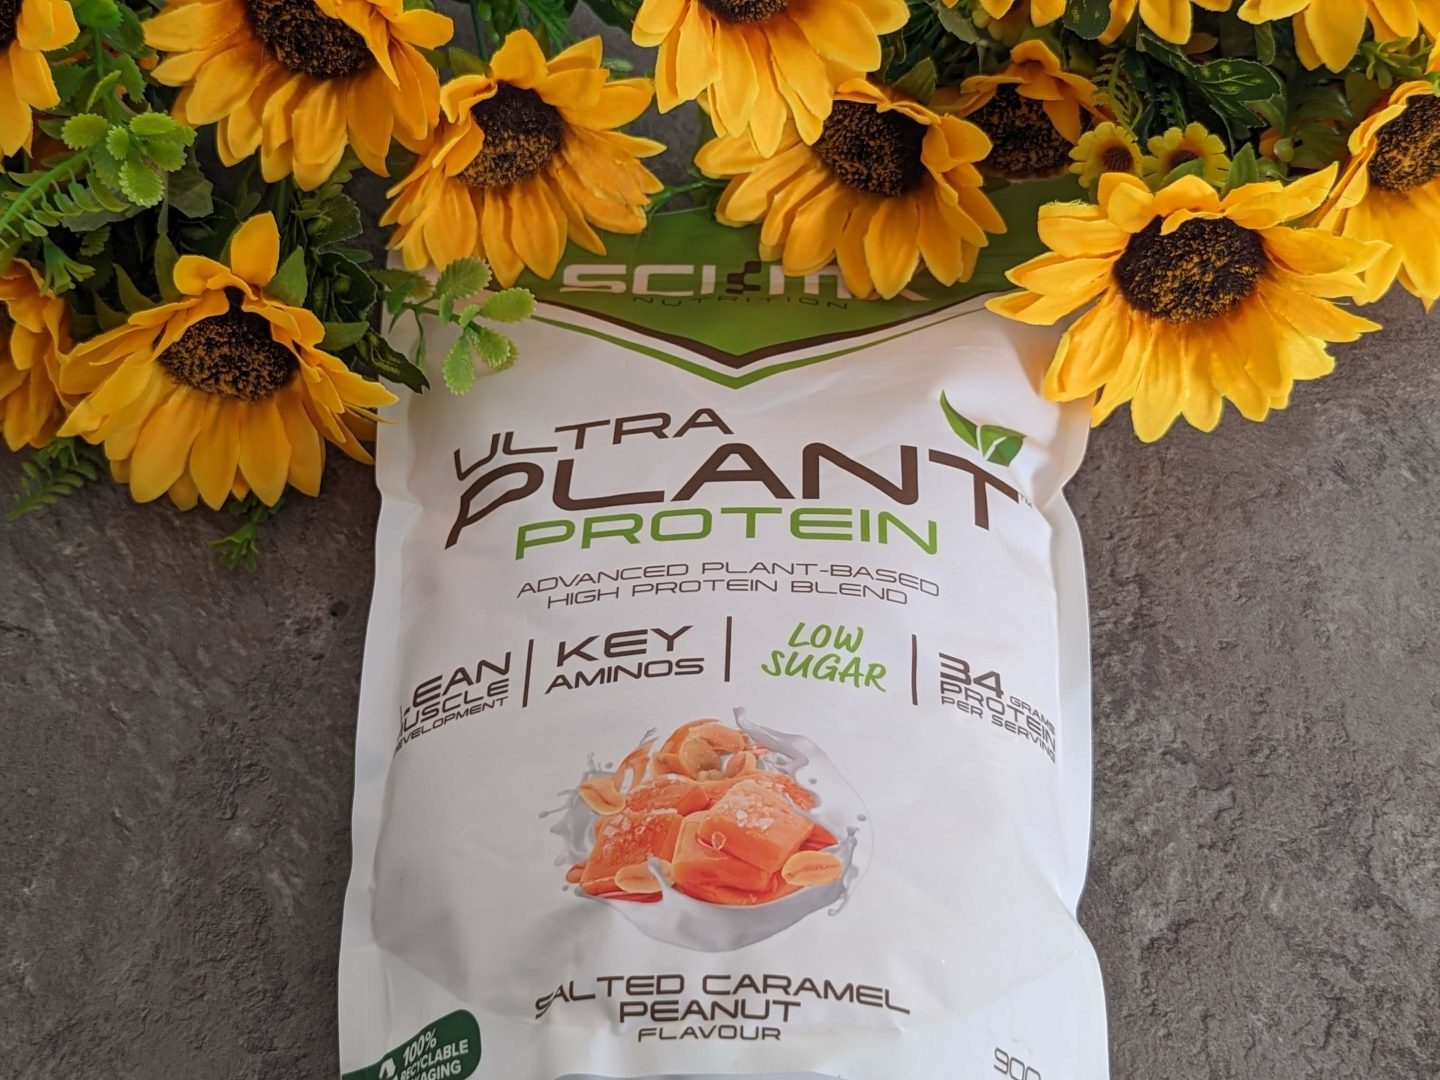 Packet of salted caramel flavour vegan protein shake displayed against a bunch of sunflowers.